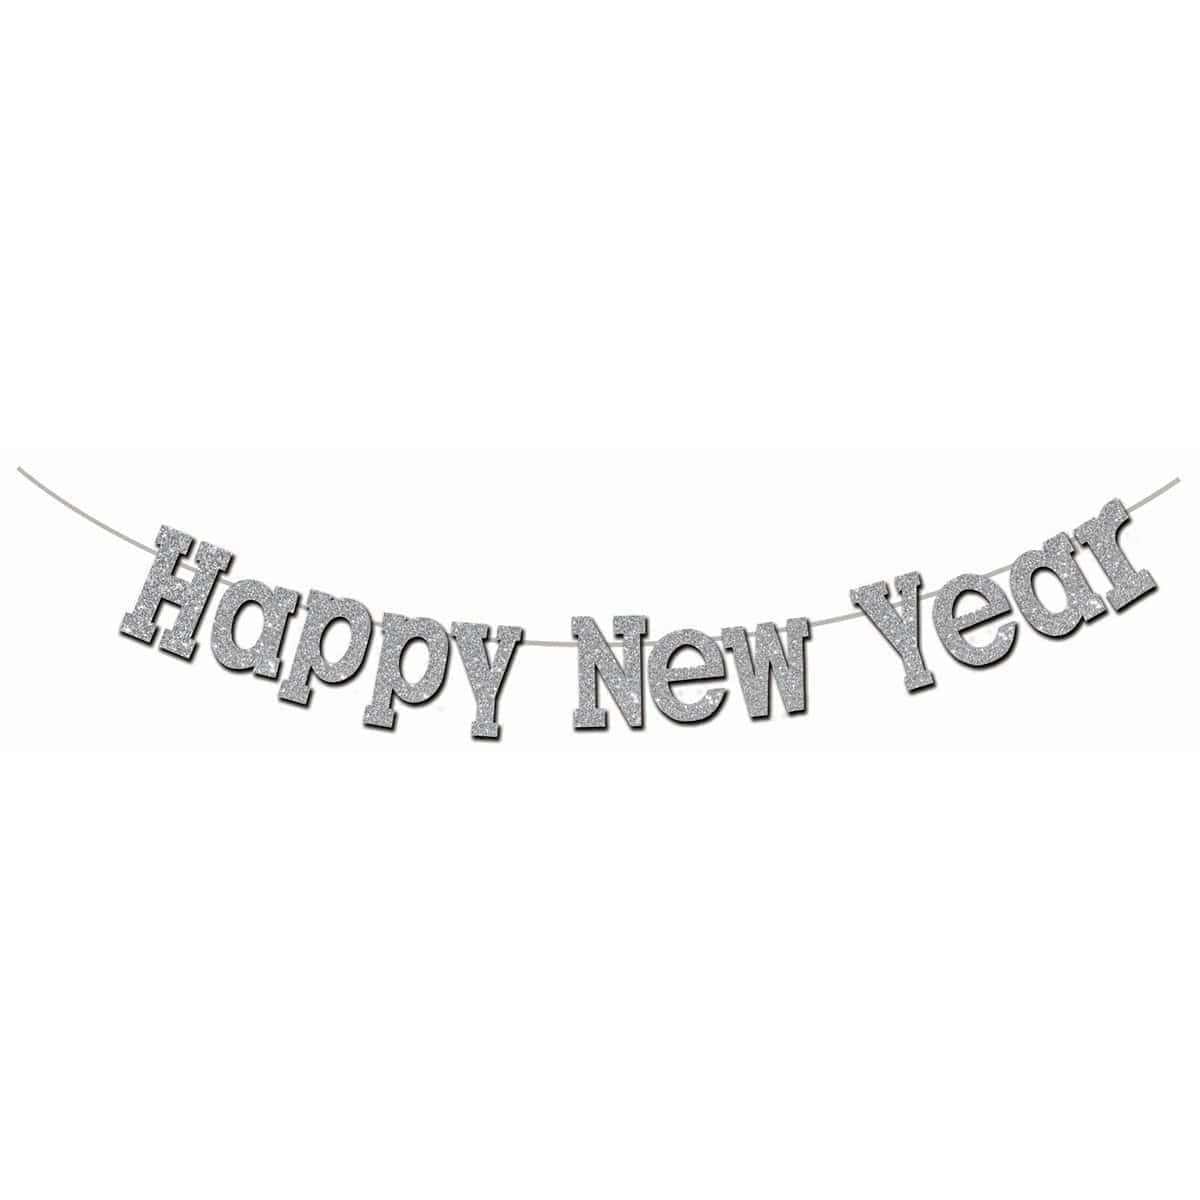 Buy New Year Happy New Year Banner 11 In. - Silver sold at Party Expert